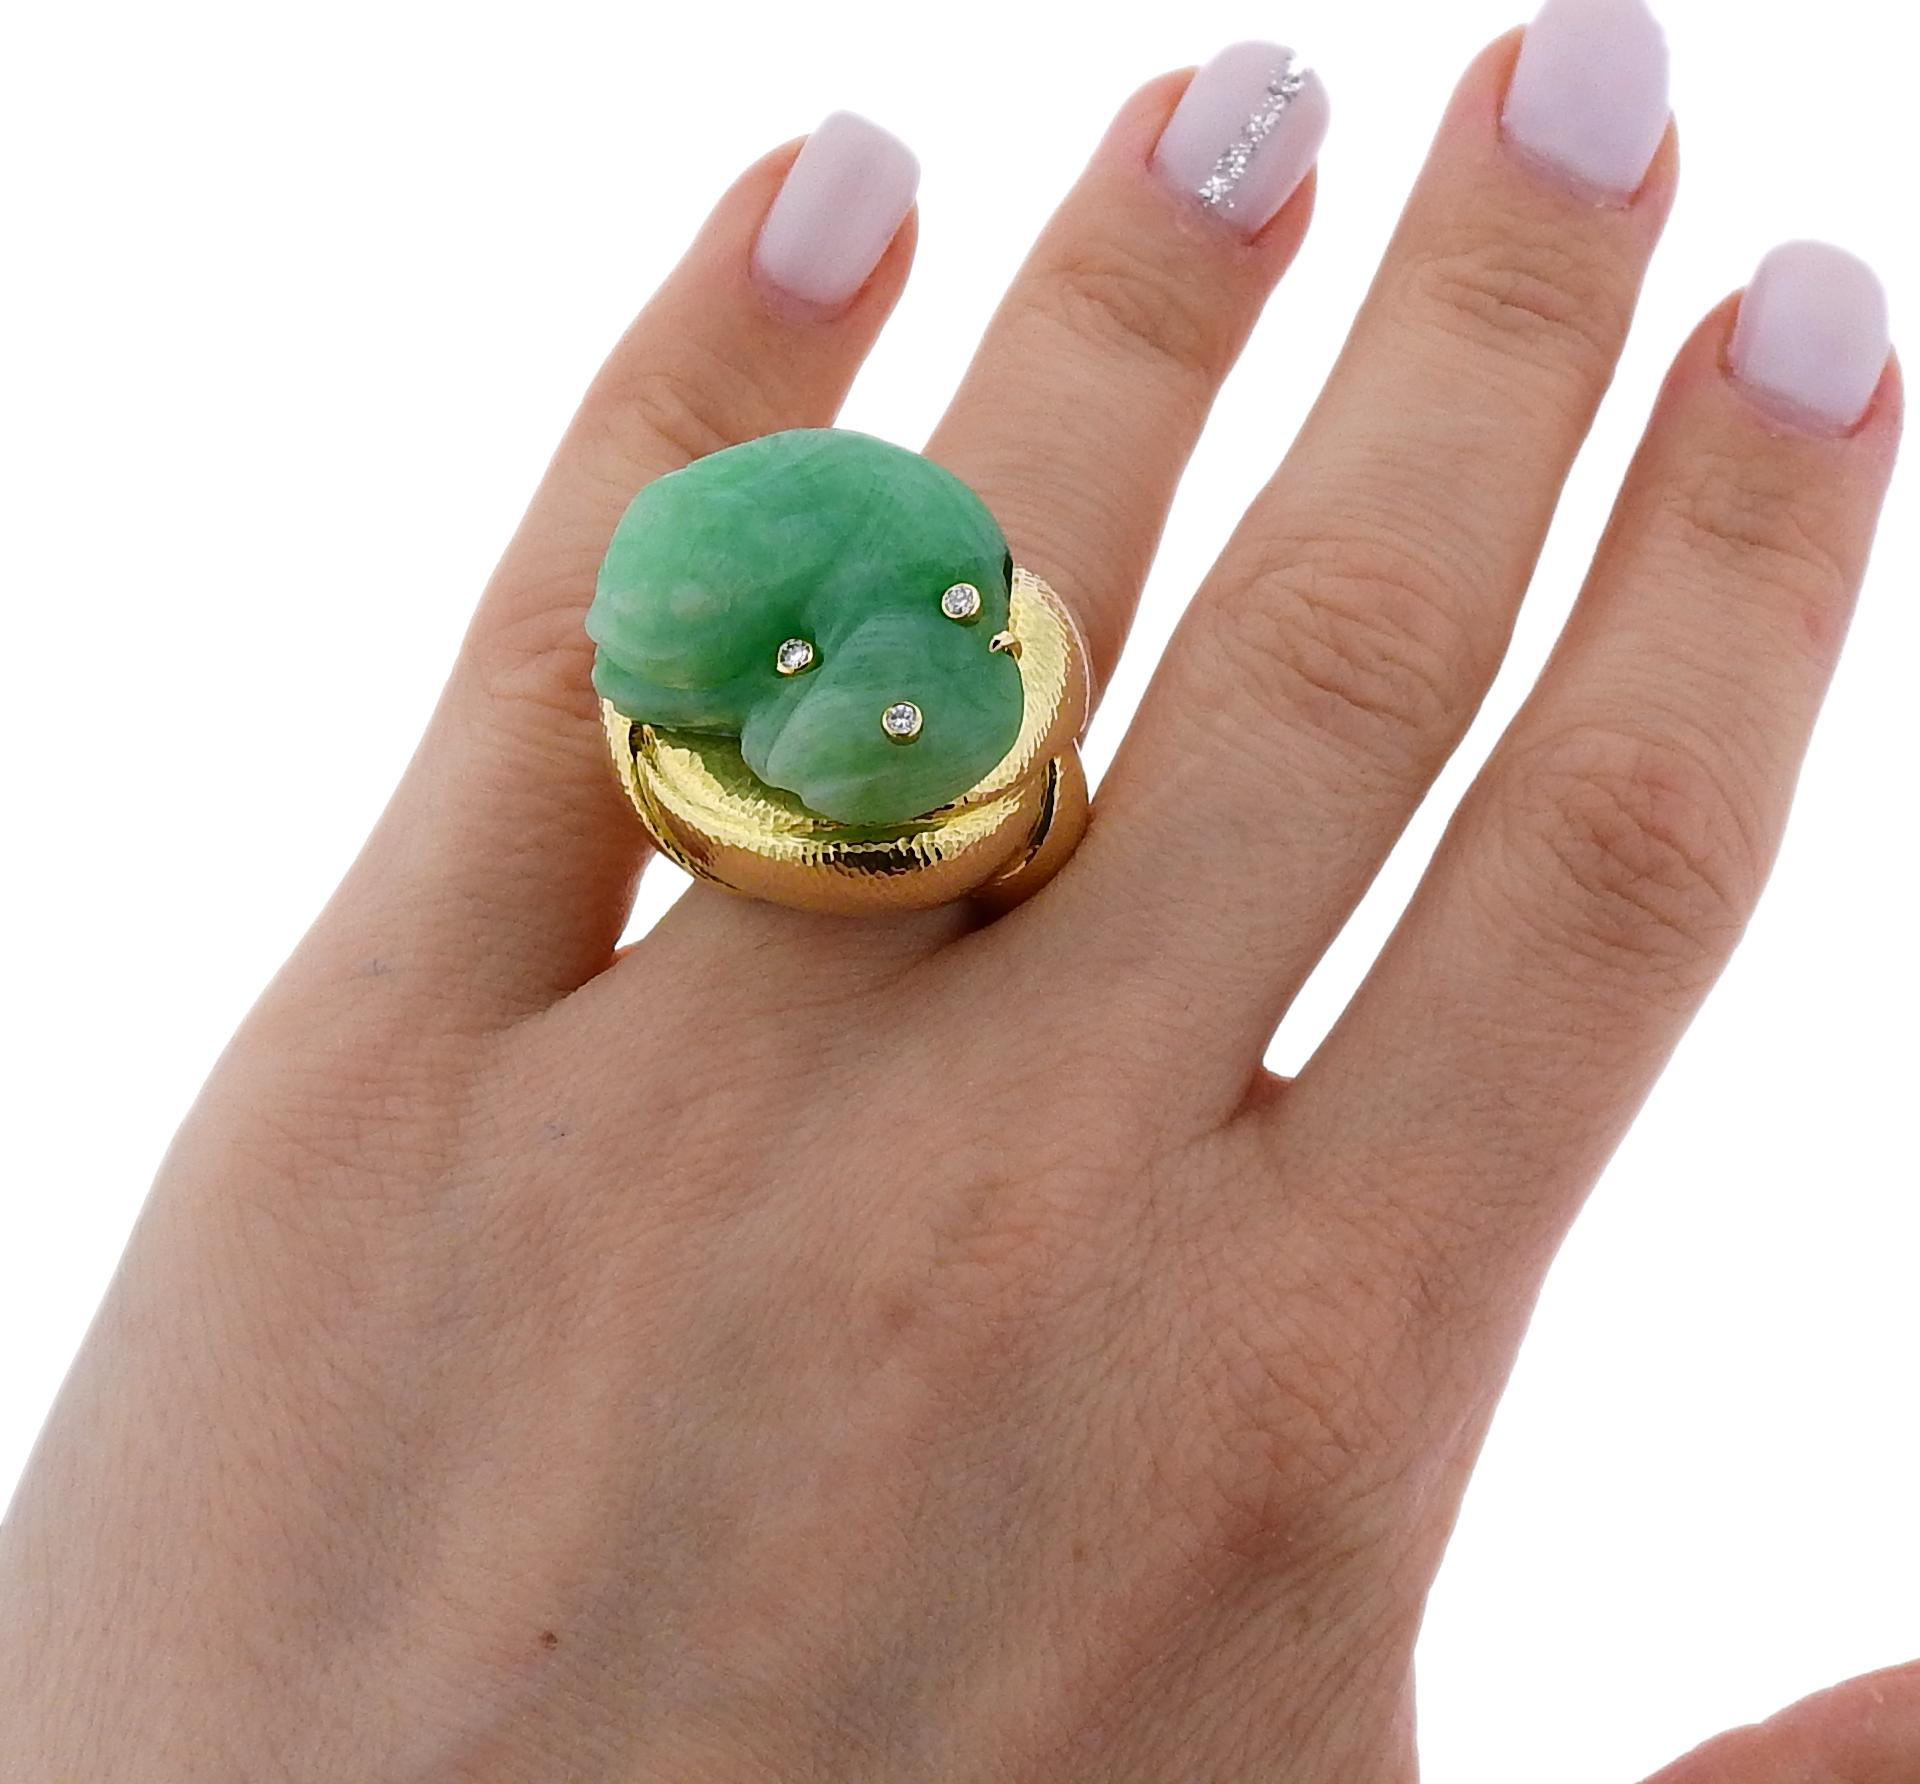 Impressive 18k yellow gold ring by David Webb, featuring carved jade and approx. 0.16ctw in H/VS-SI diamonds. Ring size - 6, ring top - 26mm x 2mm, sits approx. 23mm from the finger. Marked: Webb, 18k. Weighs 39.6 grams.